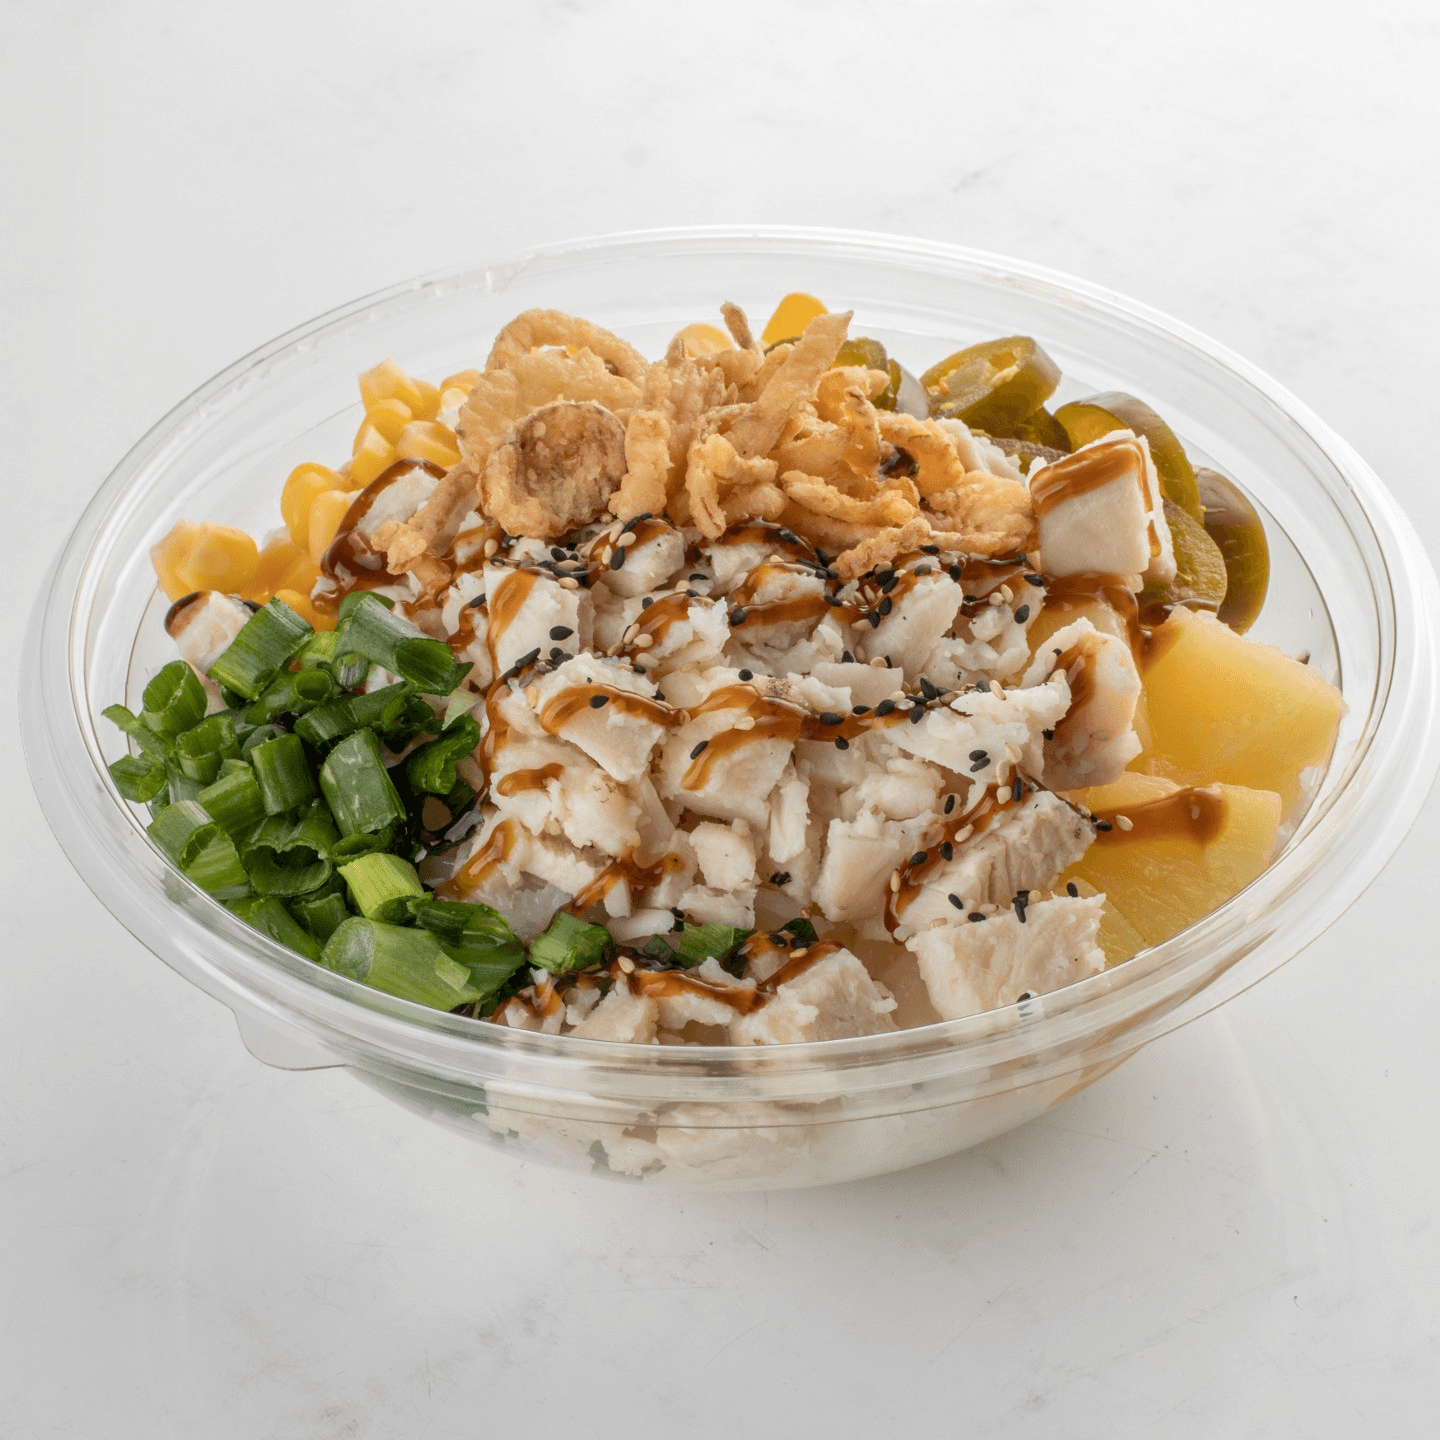 Our Signature Chicken Bowl